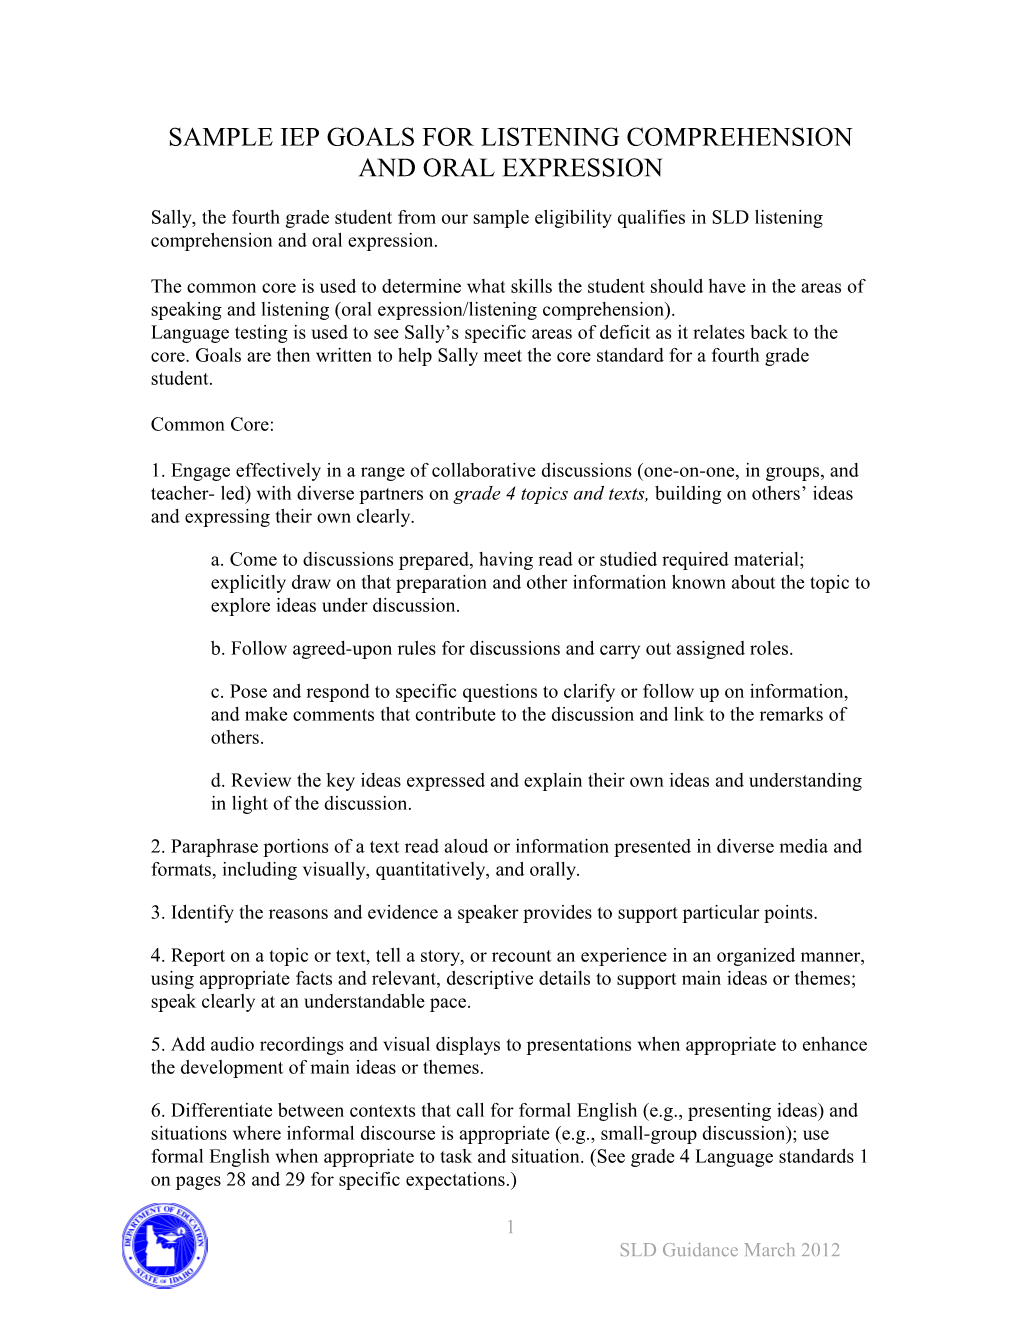 Sample Iep Goals for Listening Comprehension and Oral Expression